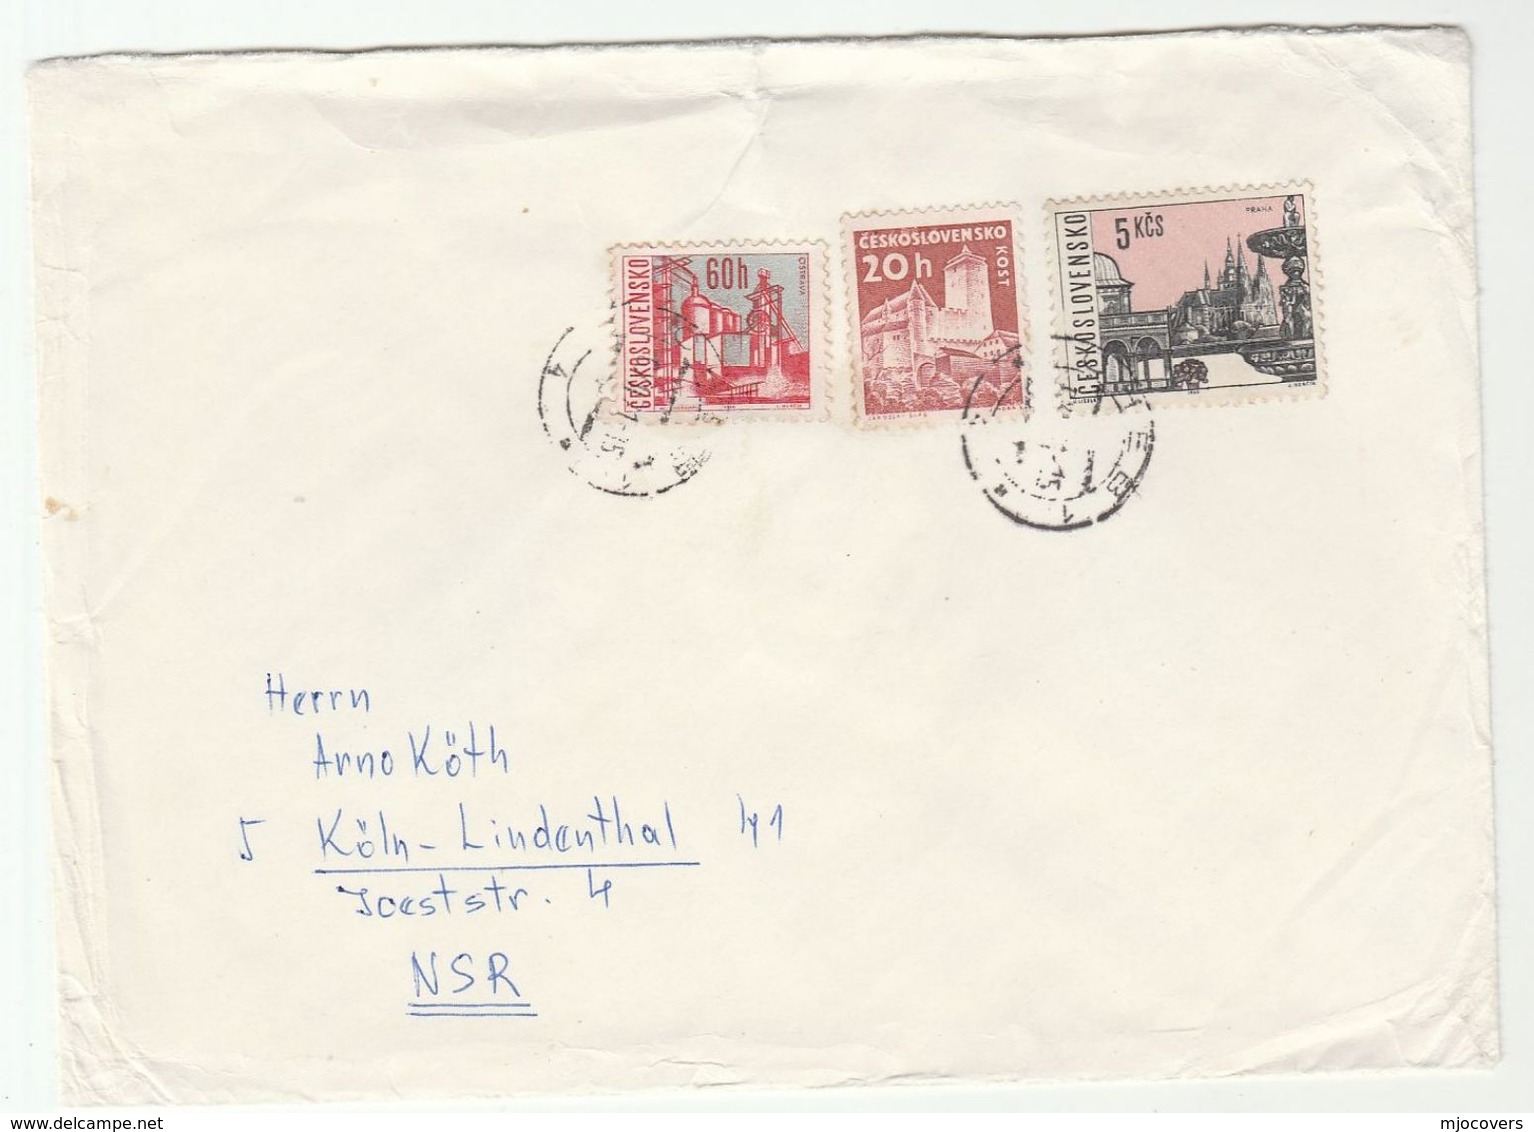 1971 CZECHOSLOVAKIA  Stamps COVER  To Germany - Lettres & Documents